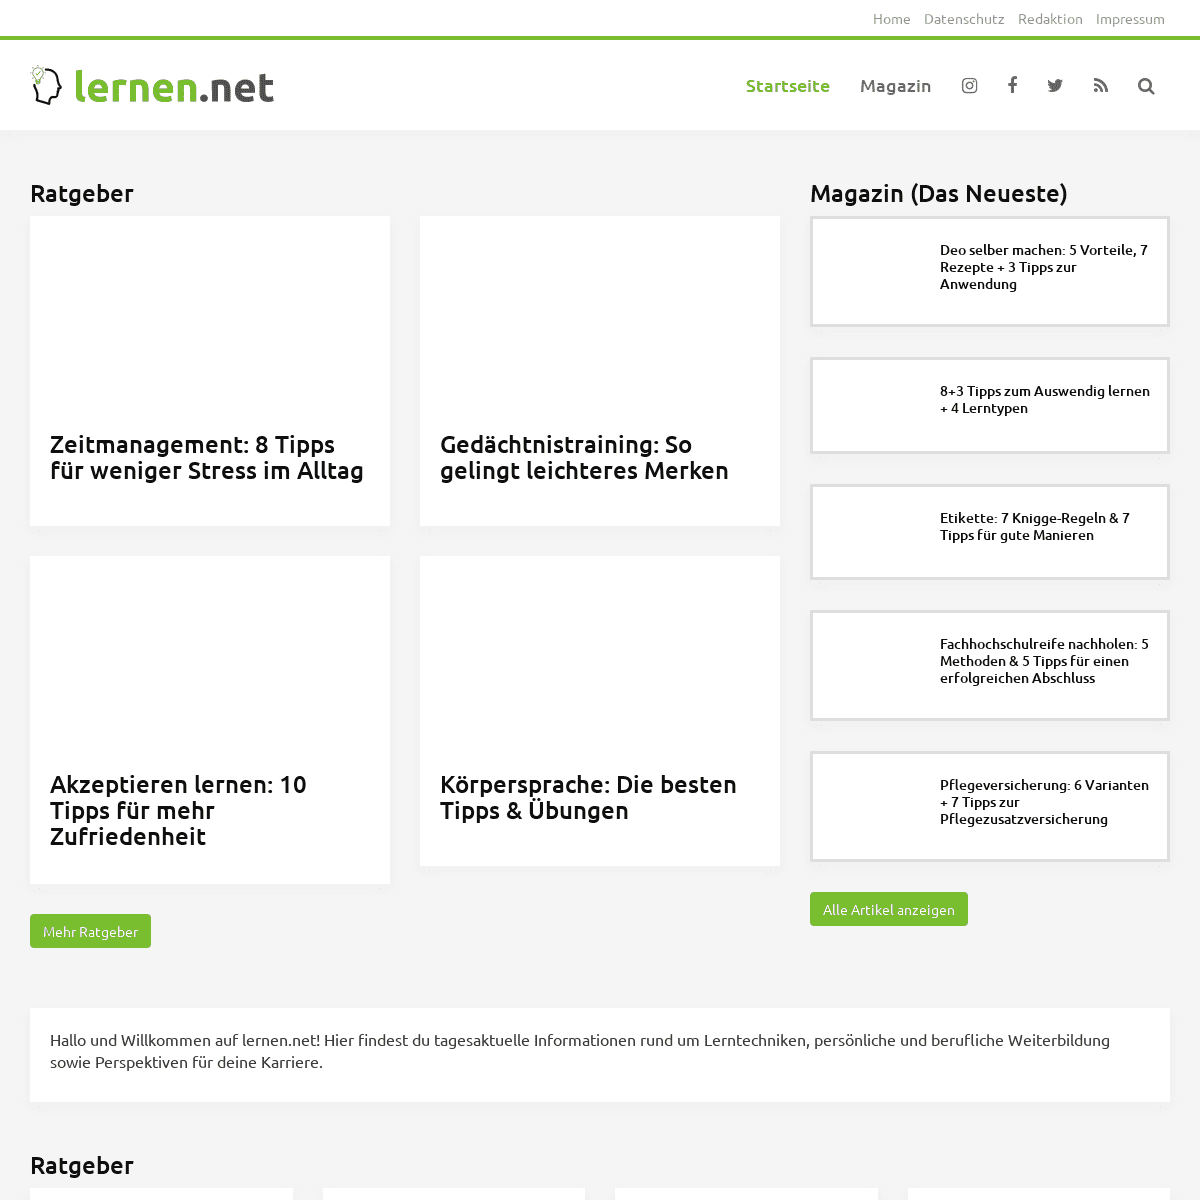 A complete backup of https://lernen.net